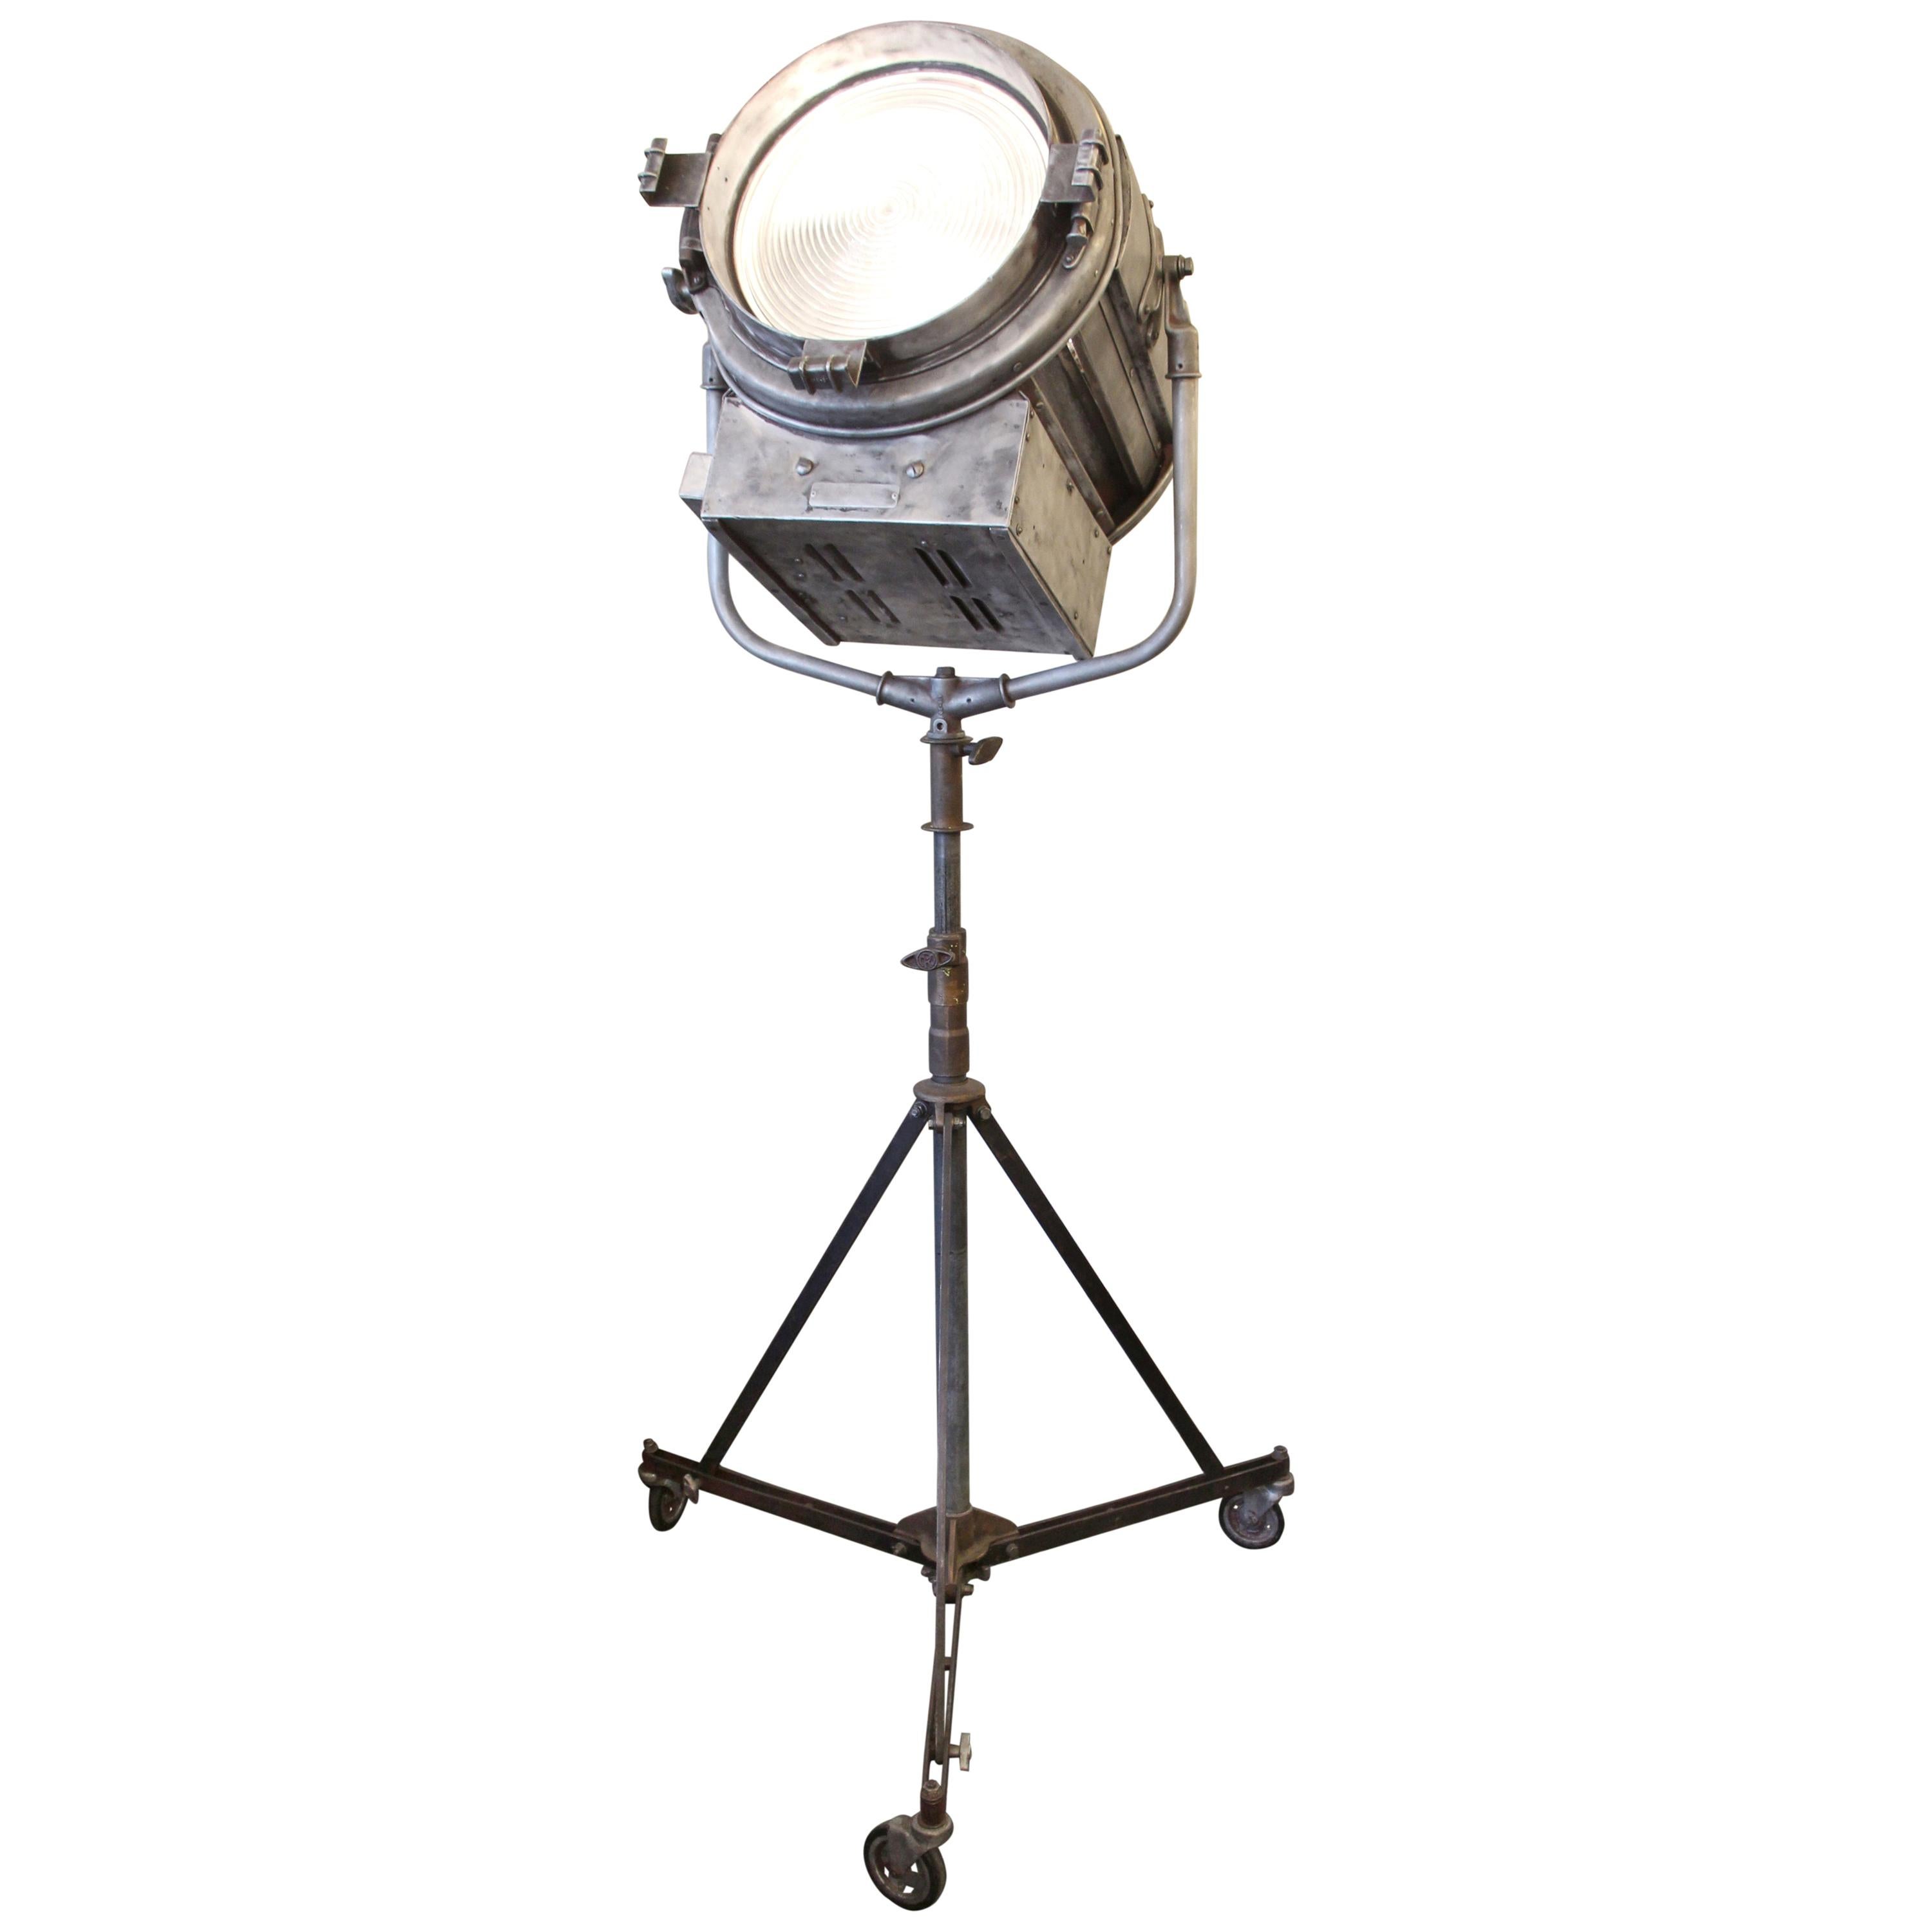 1940s Adjustable Stripped and Lacquered Mole Richardson Spotlight with Tripod